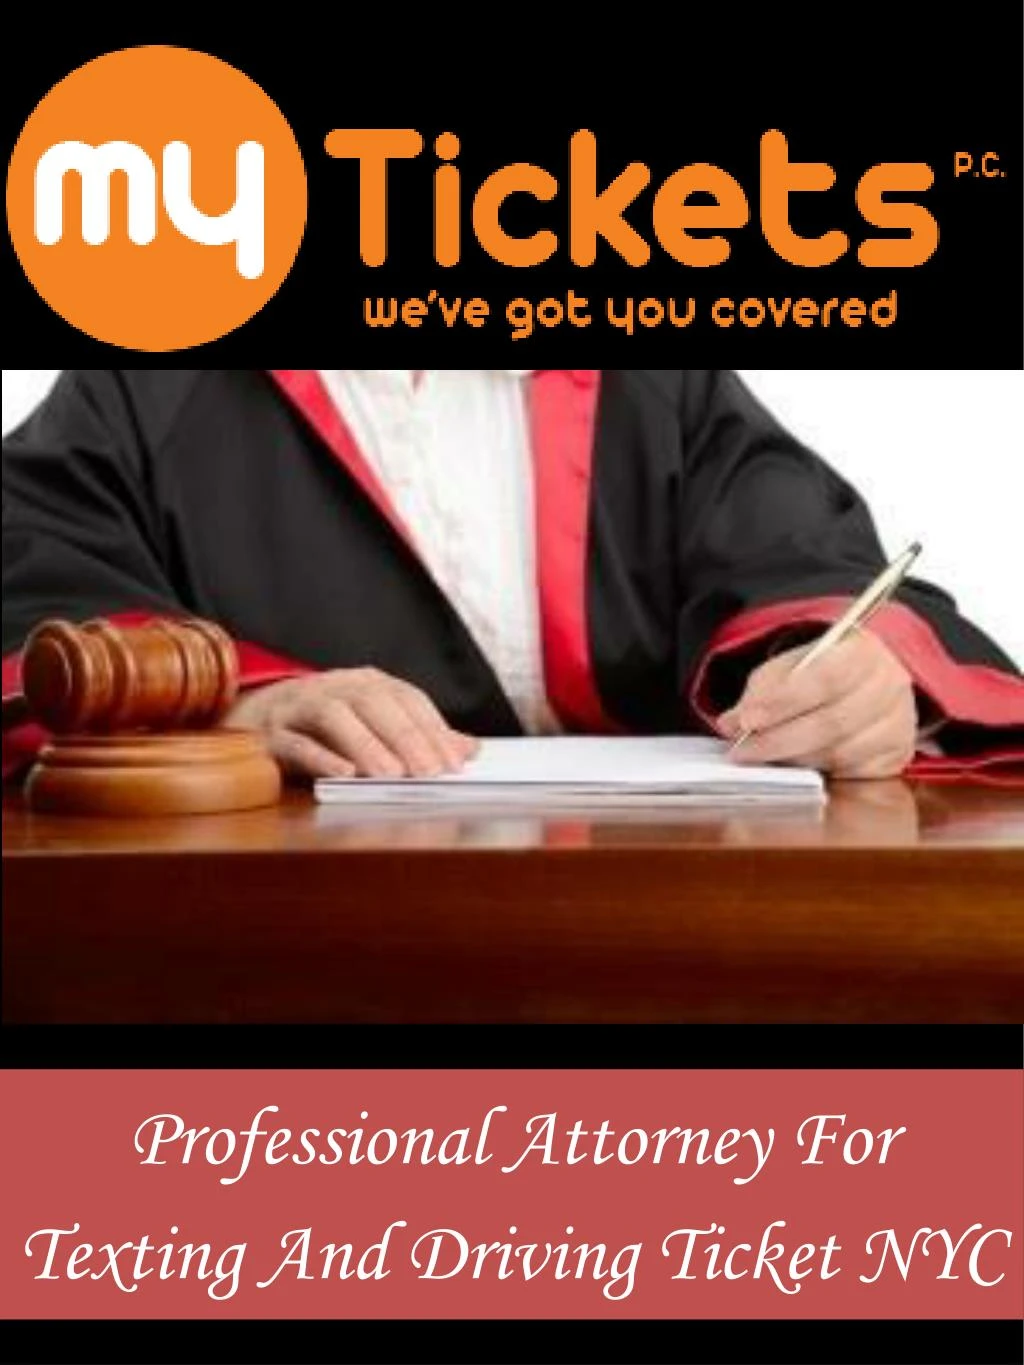 professional attorney for texting and driving ticket nyc n.